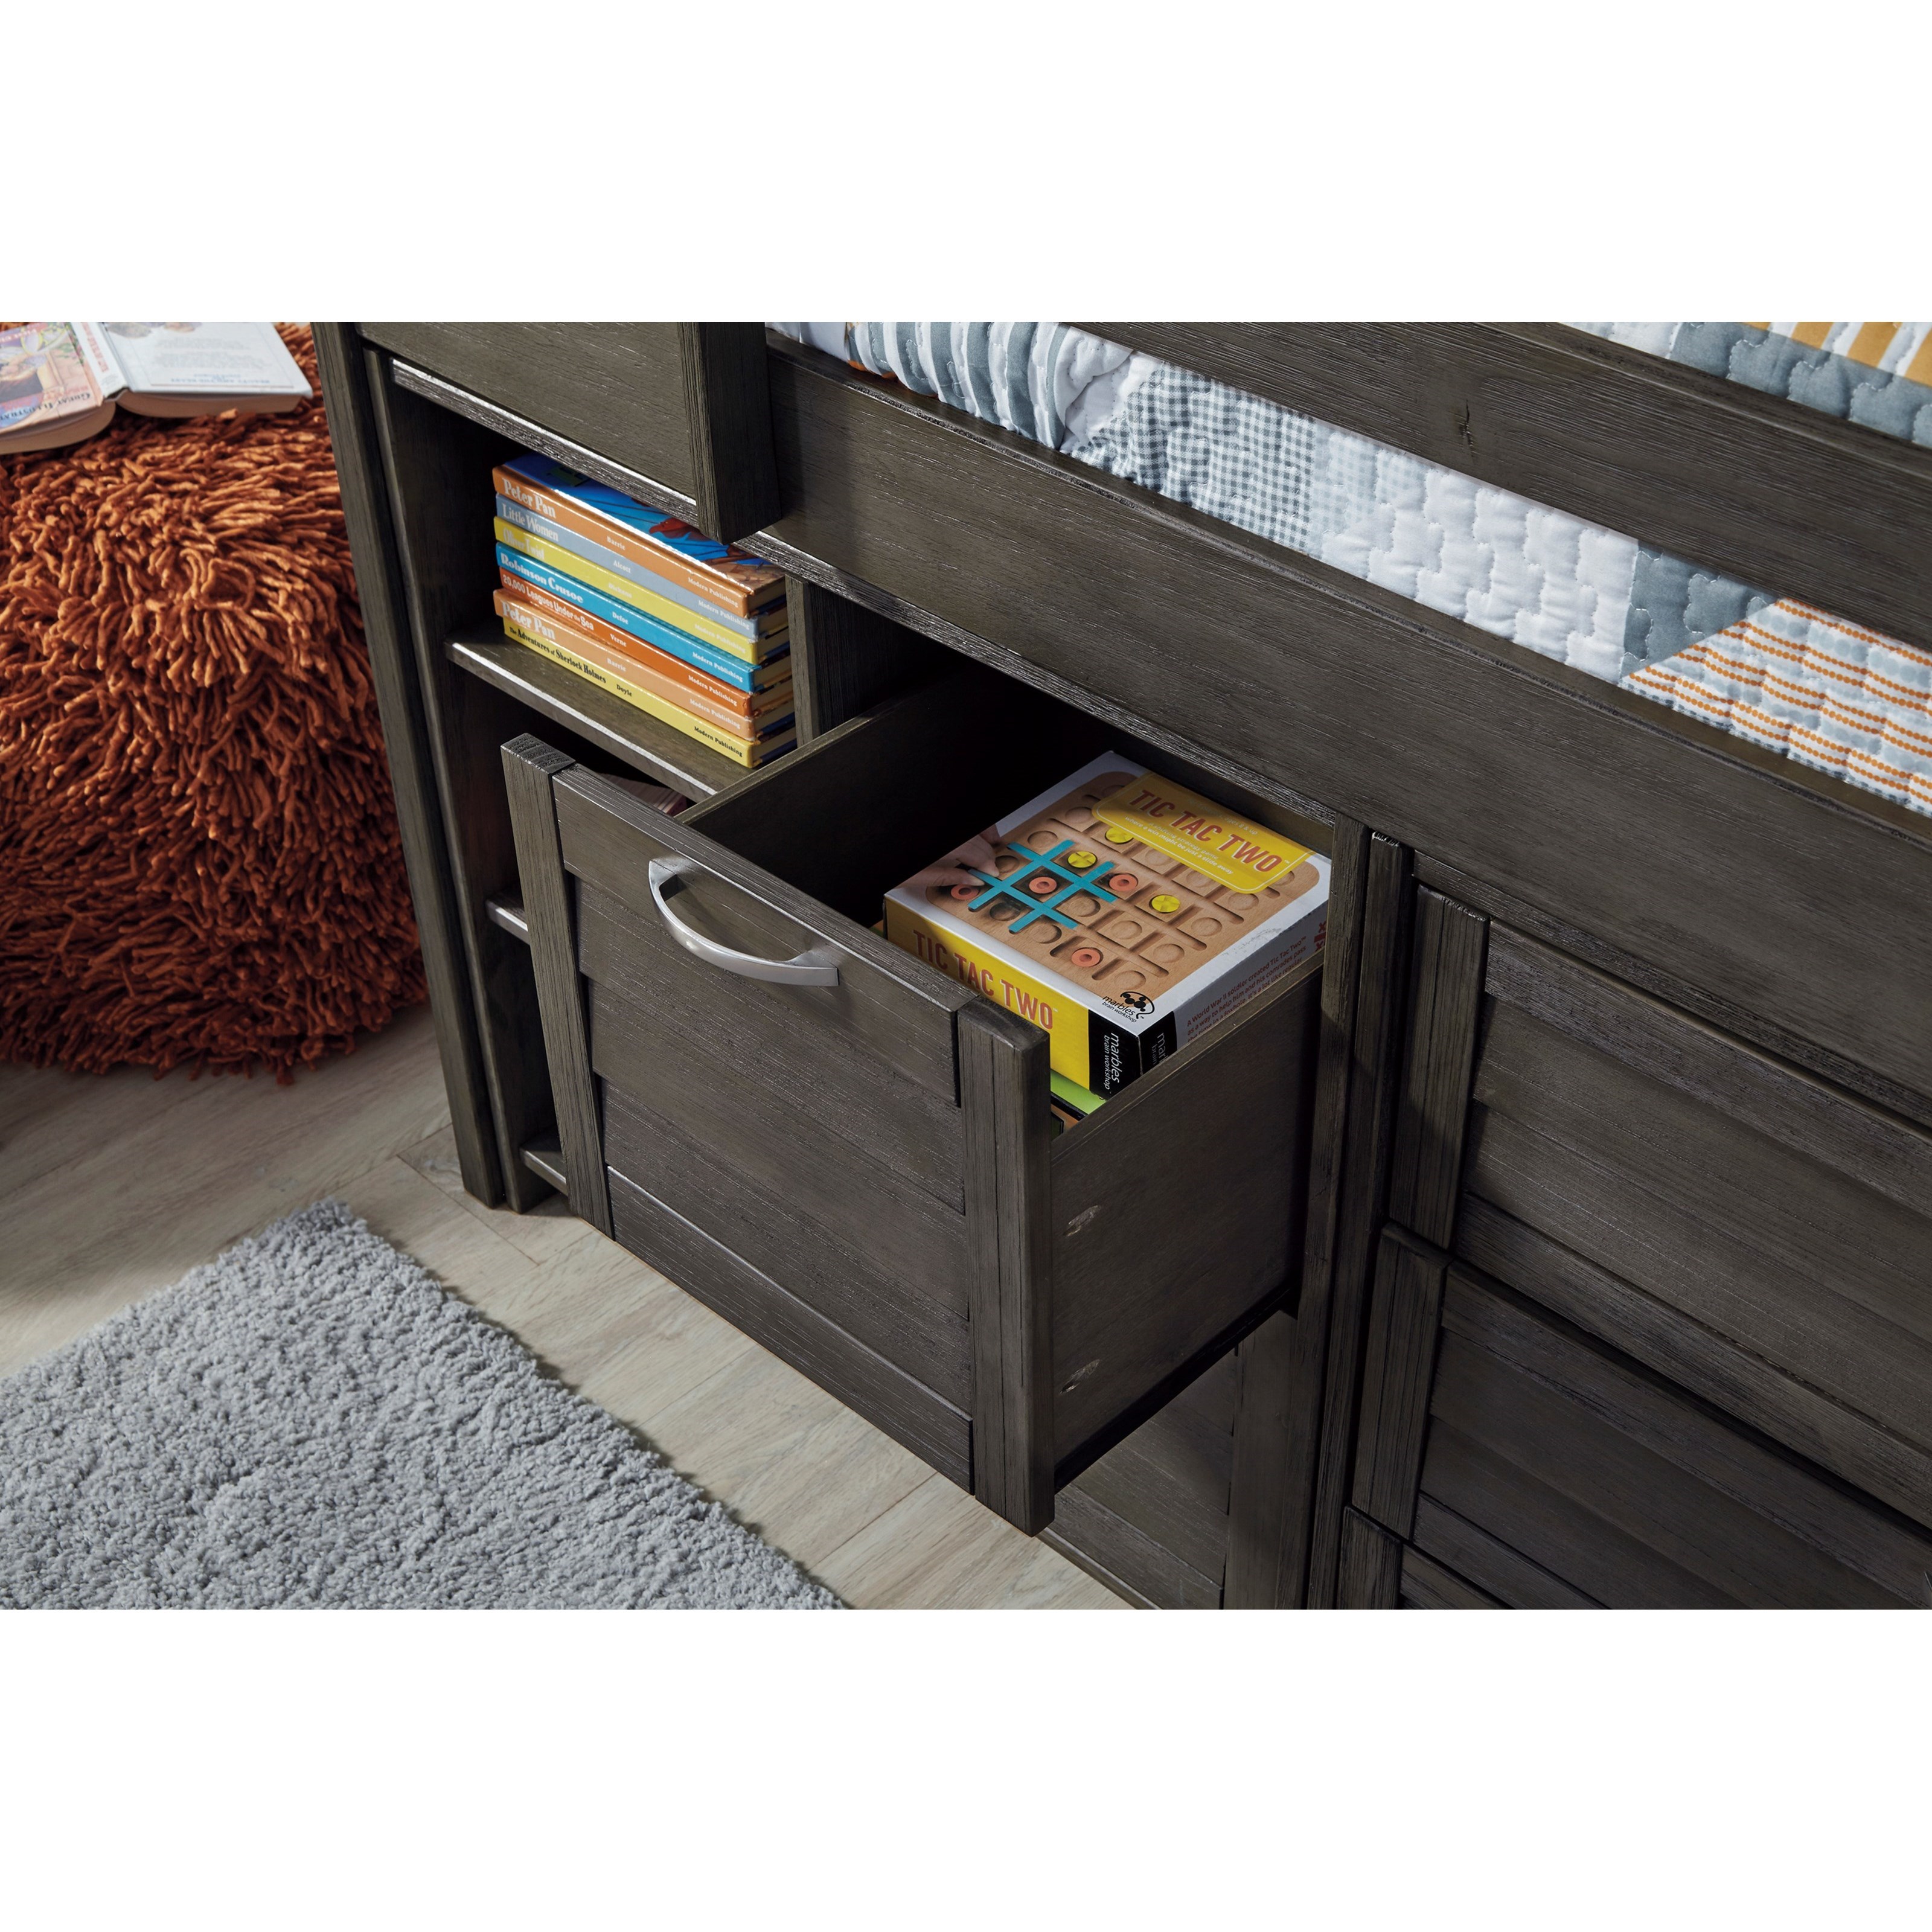 caitbrook twin loft bed with storage